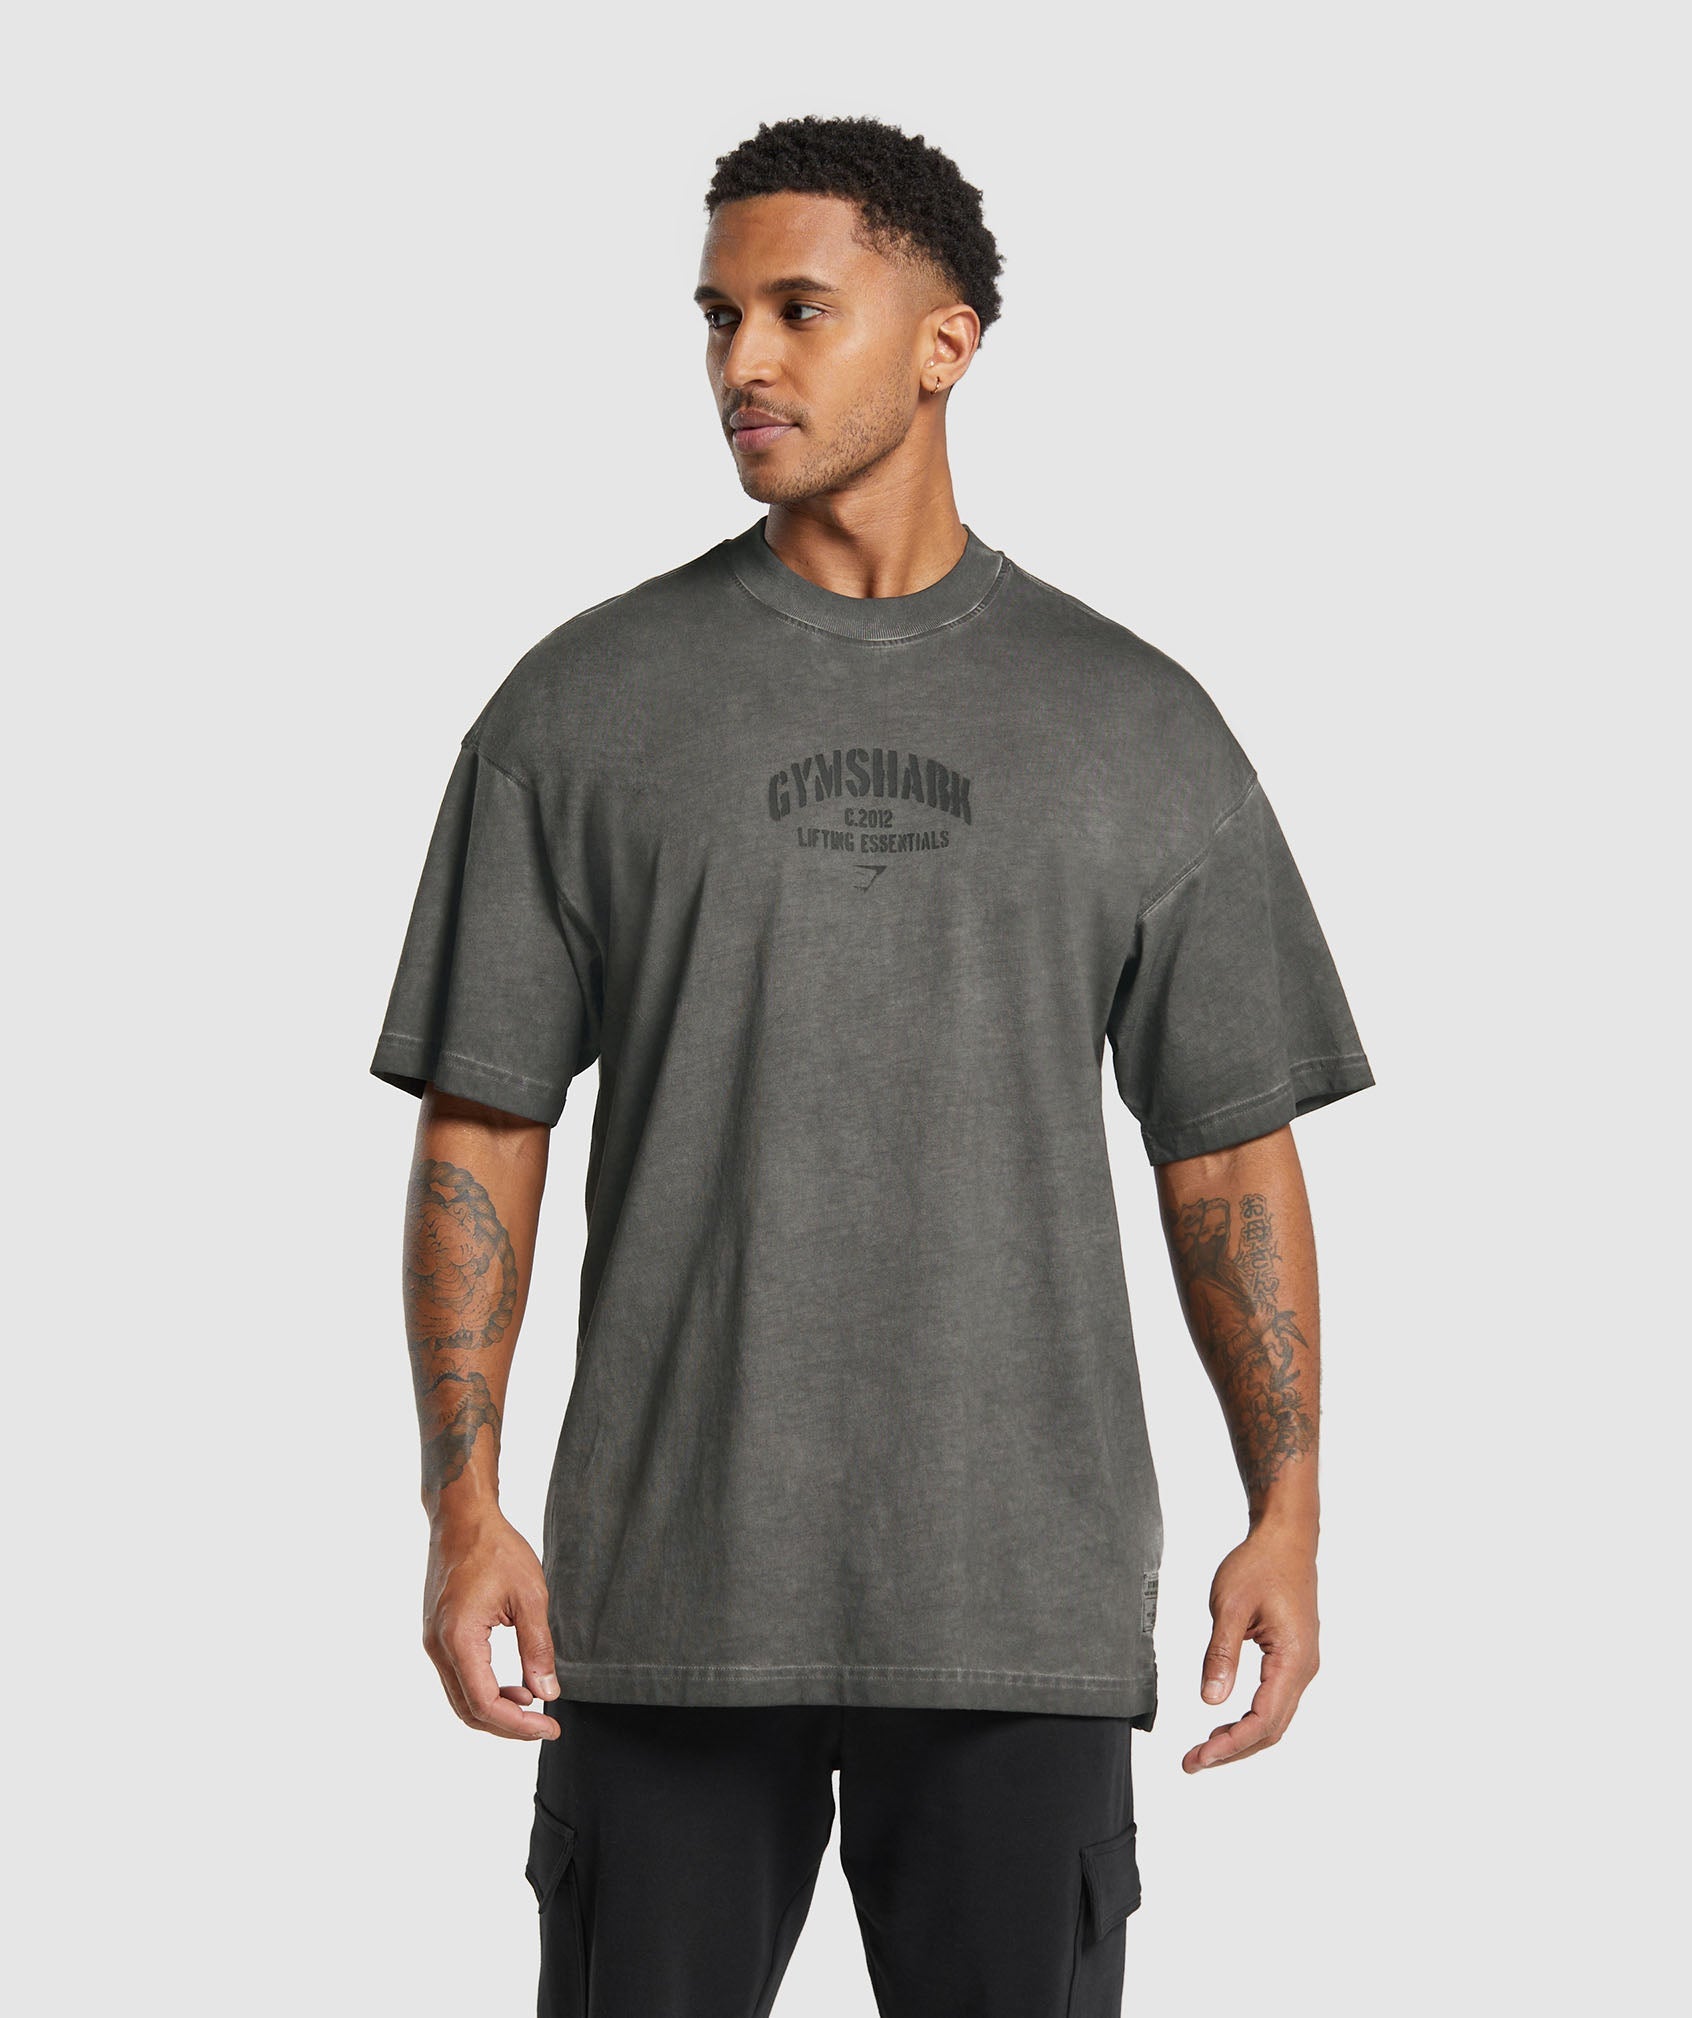 Heavyweight Washed T-Shirt in Black - view 1